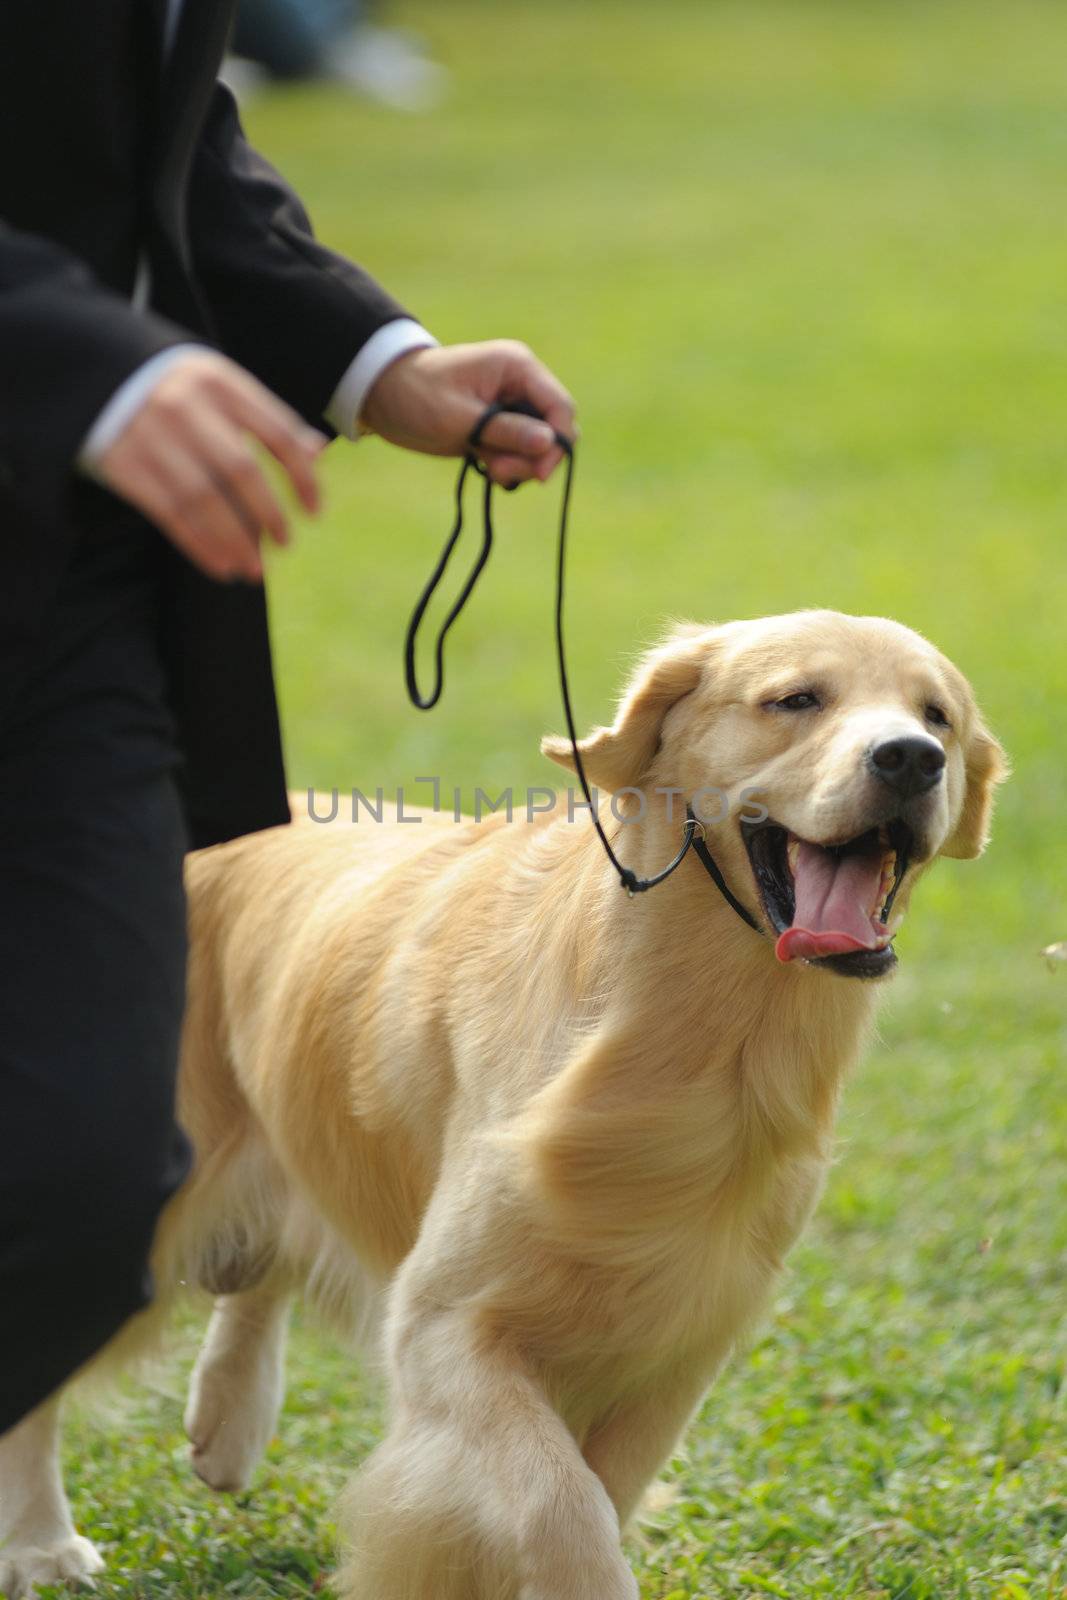 Master playing with golden retriever dog by raywoo